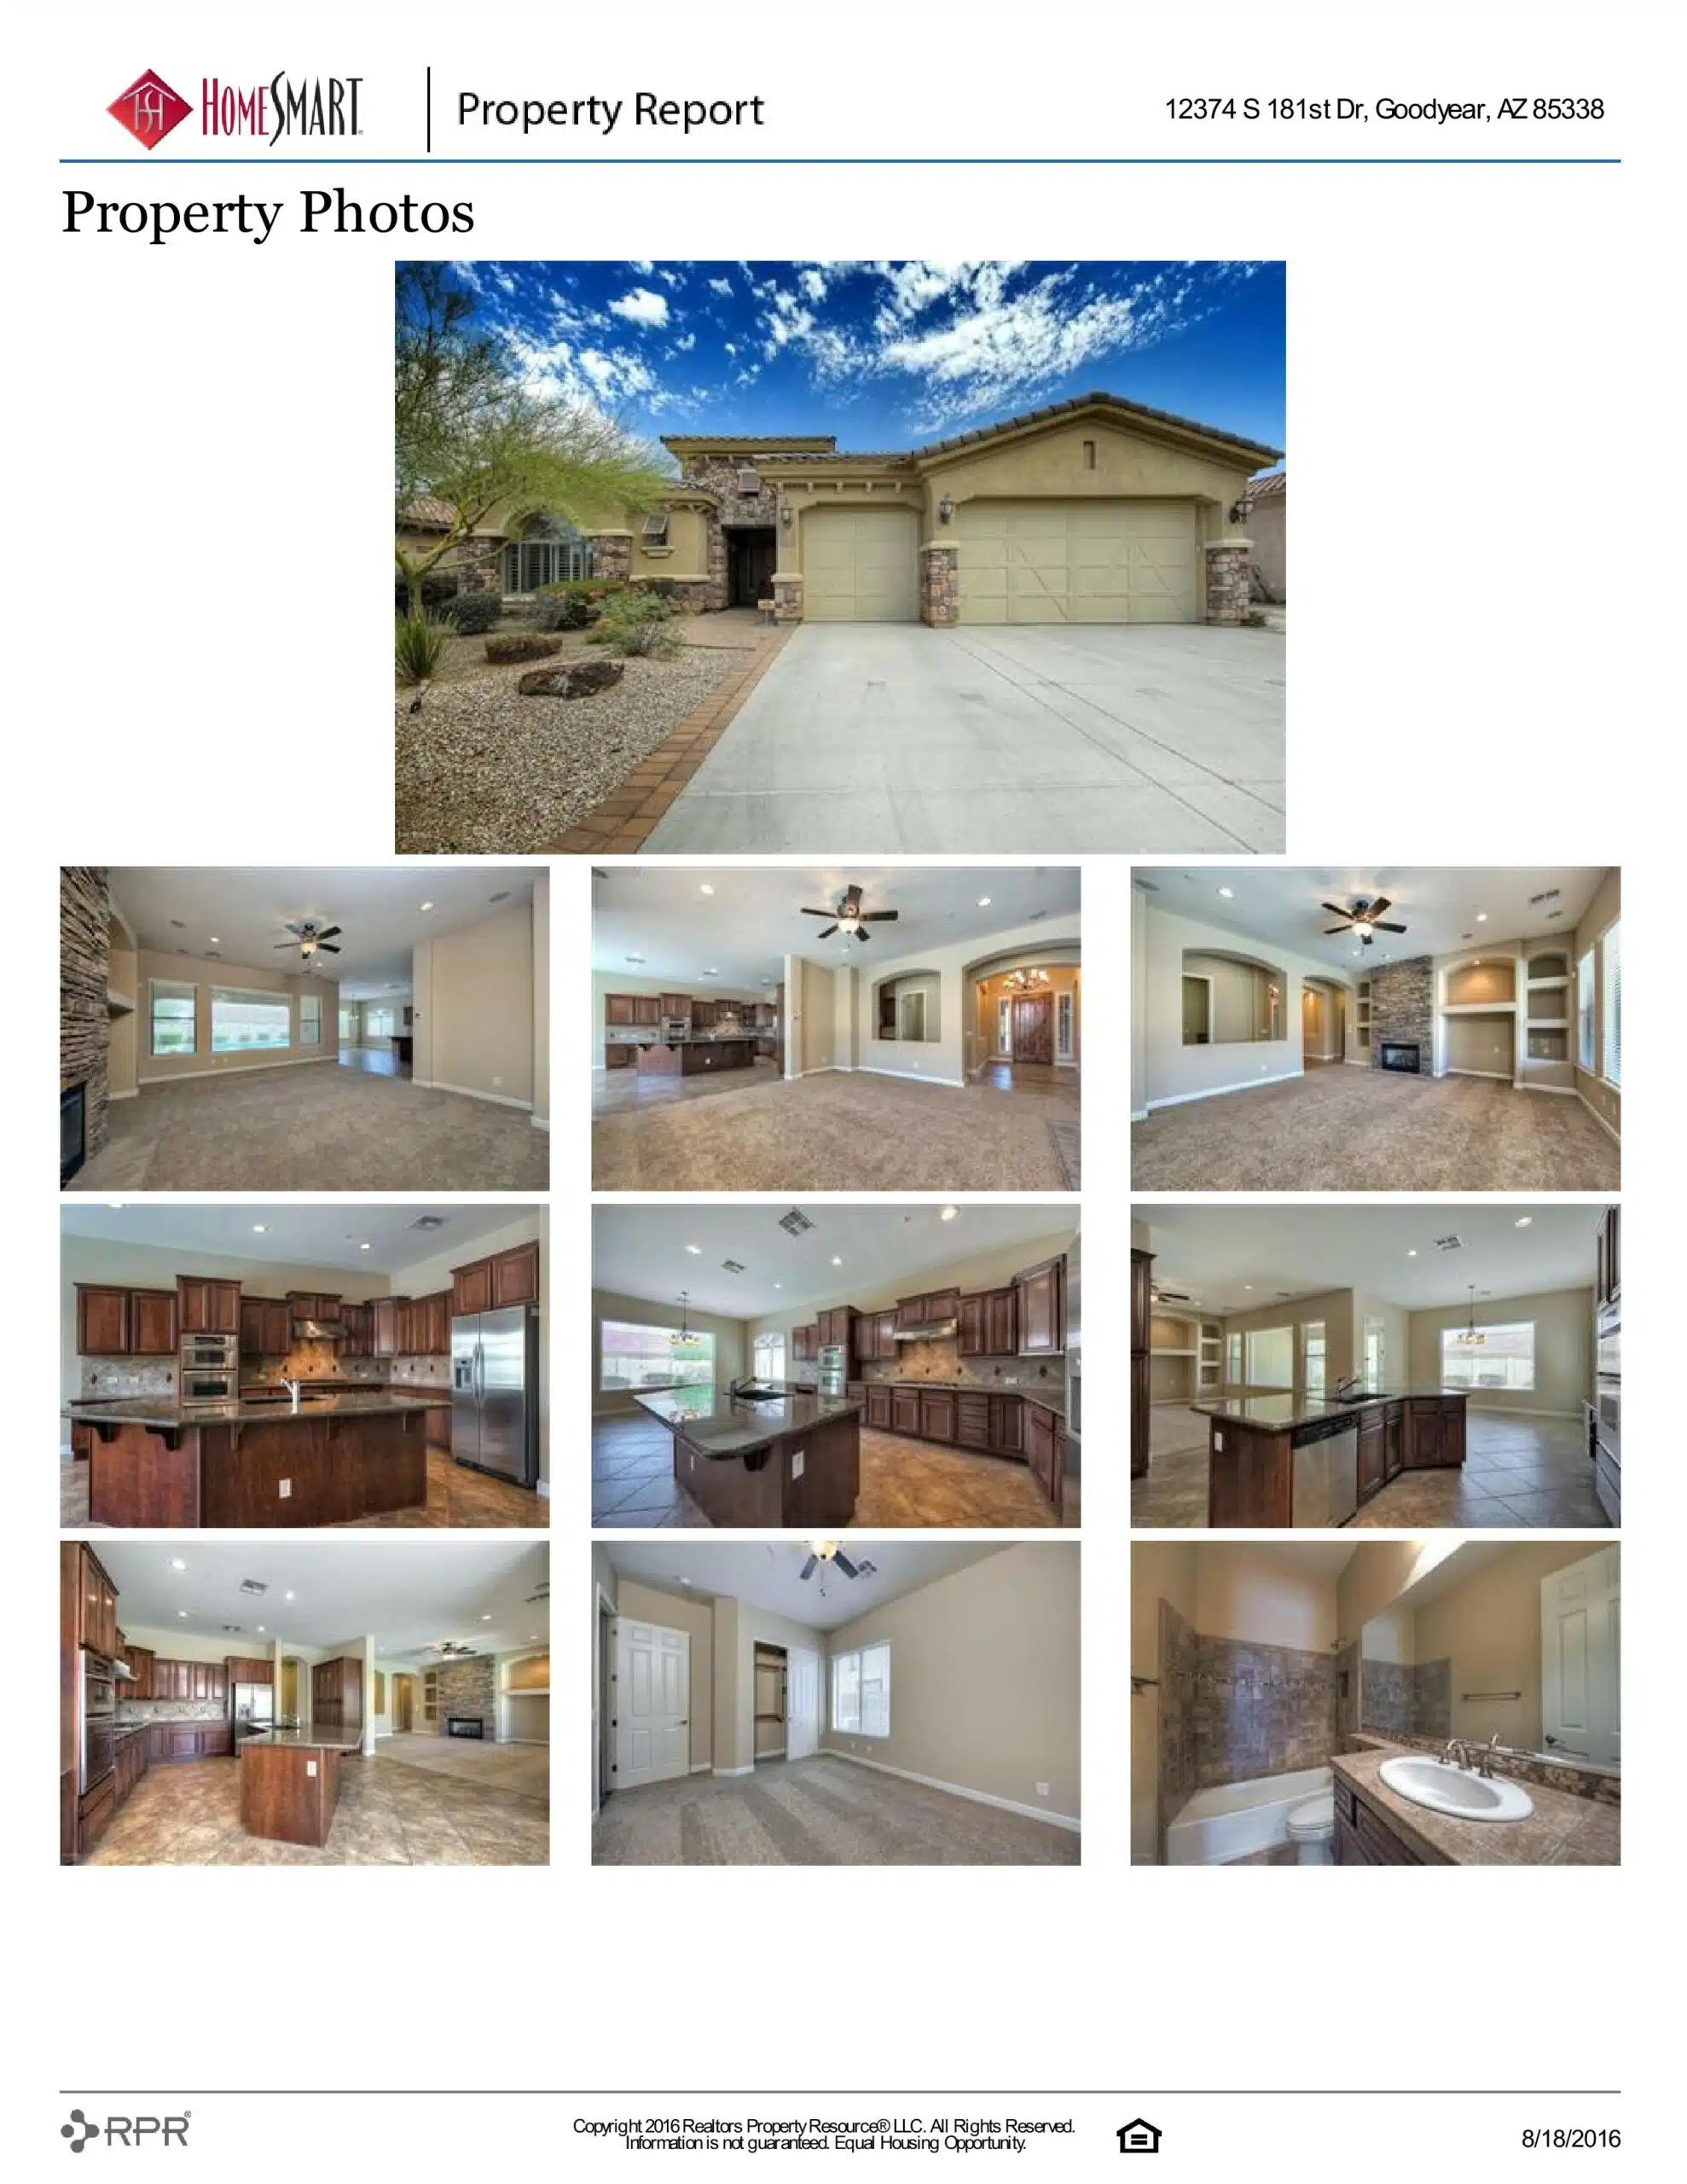 Property-Report_12374-S-181st-Dr-Goodyear-AZ-85338_2016-08-18-10-08-18-page-005